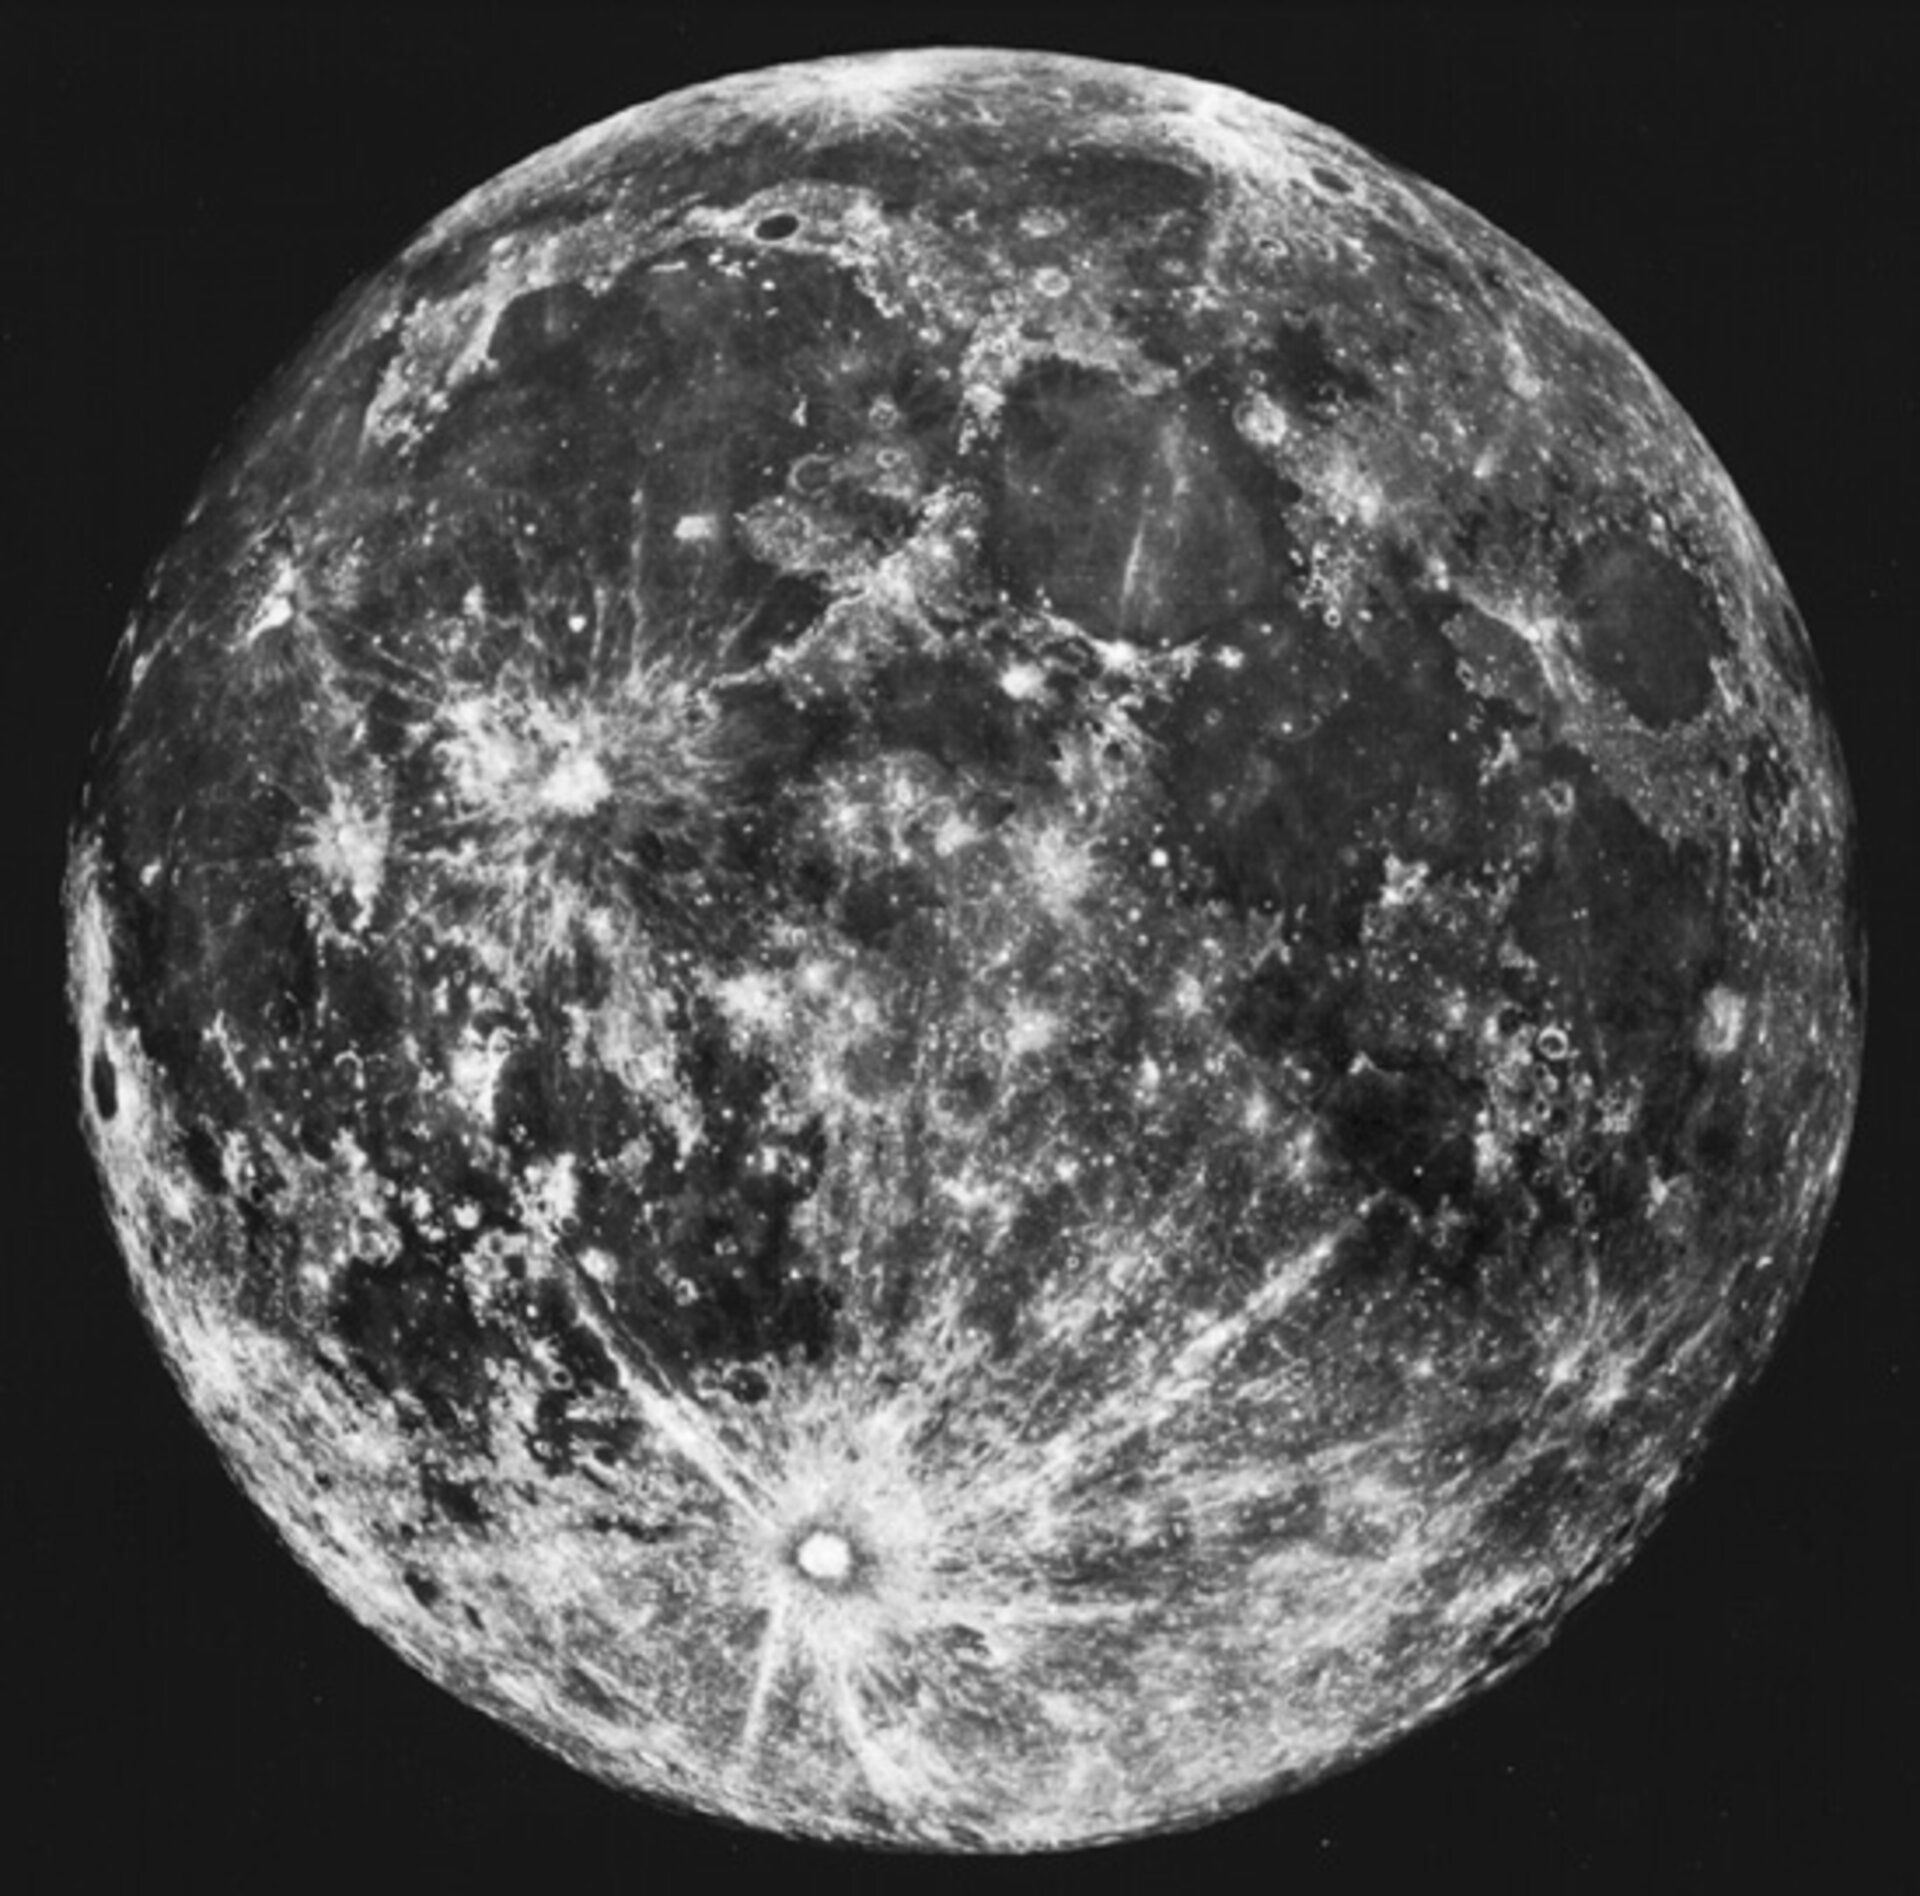 Telescopic view of the whole Moon seen from Earth